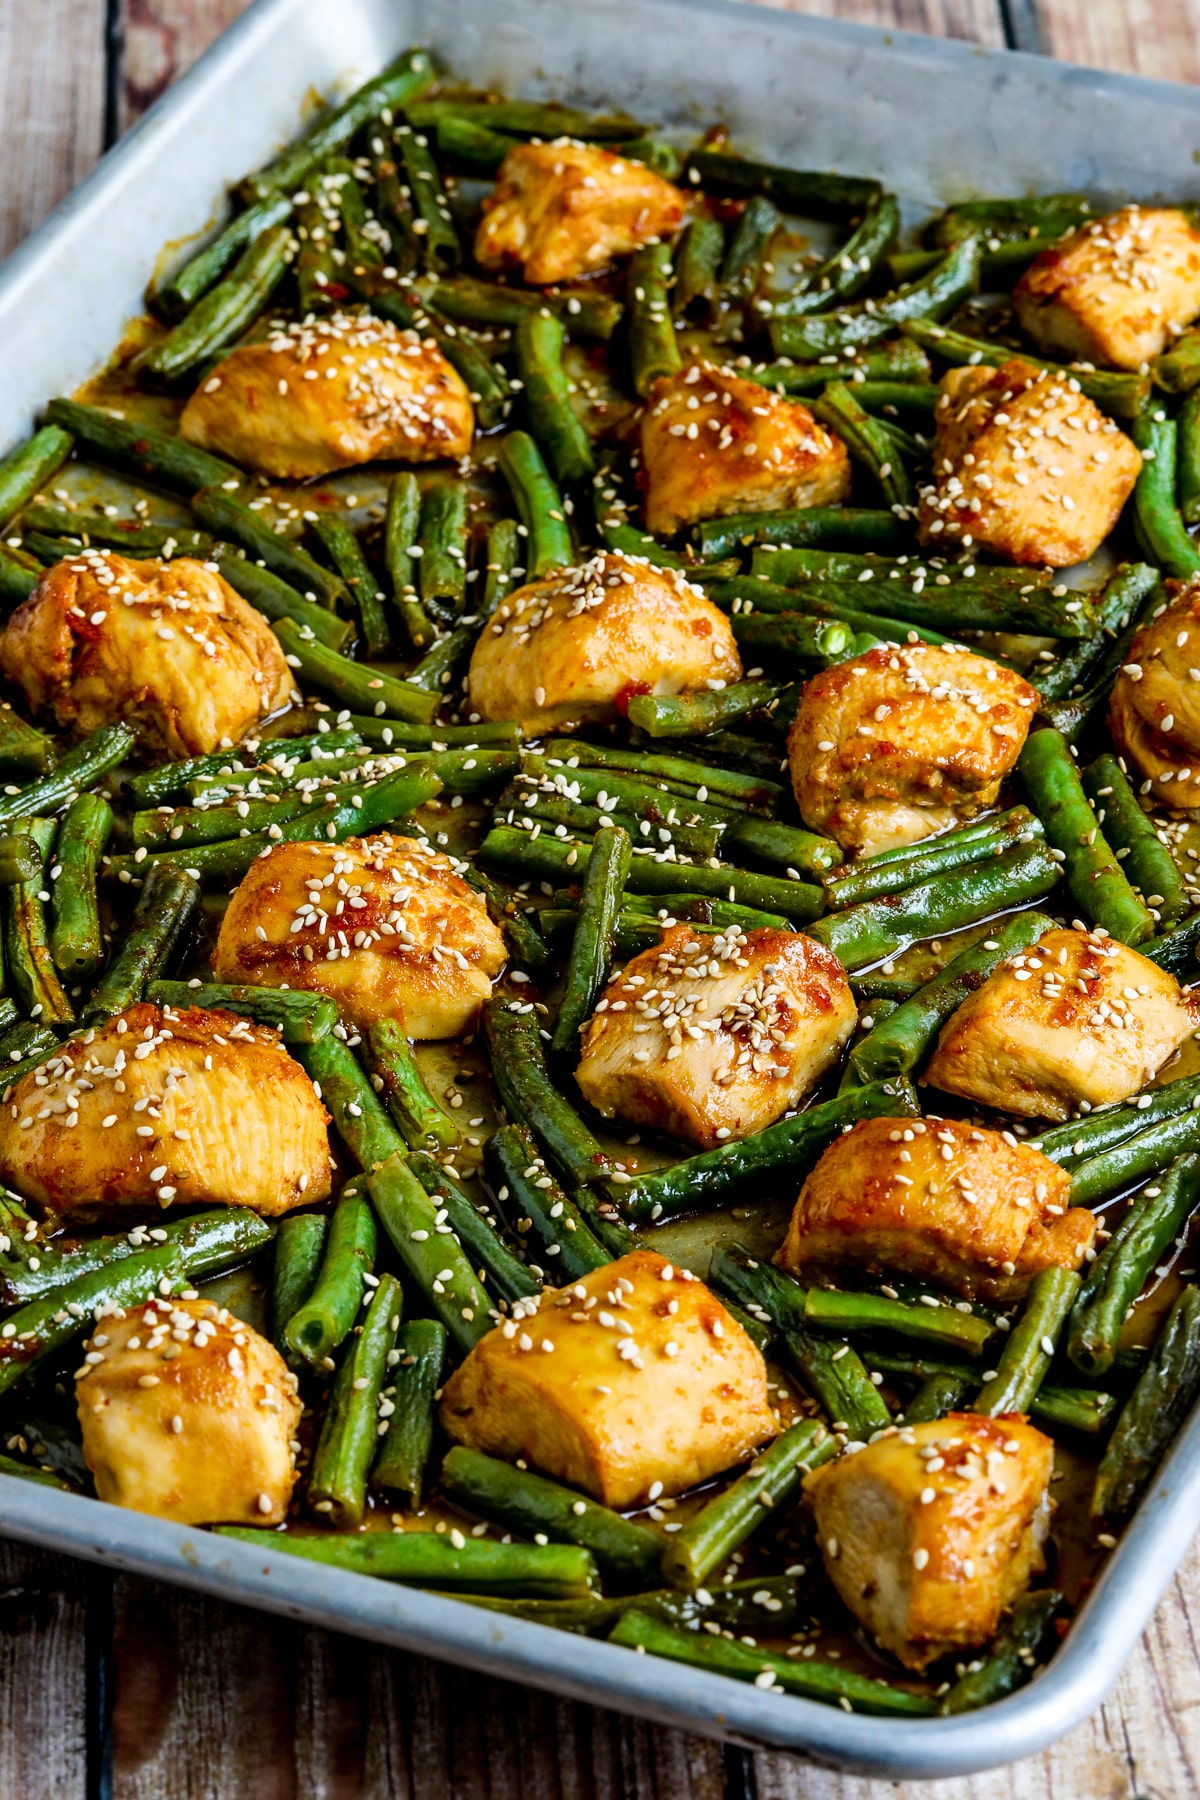 The Asian Chicken and Green Beans Sheet Bread Meal is presented in a sesame seeded sheet pan.